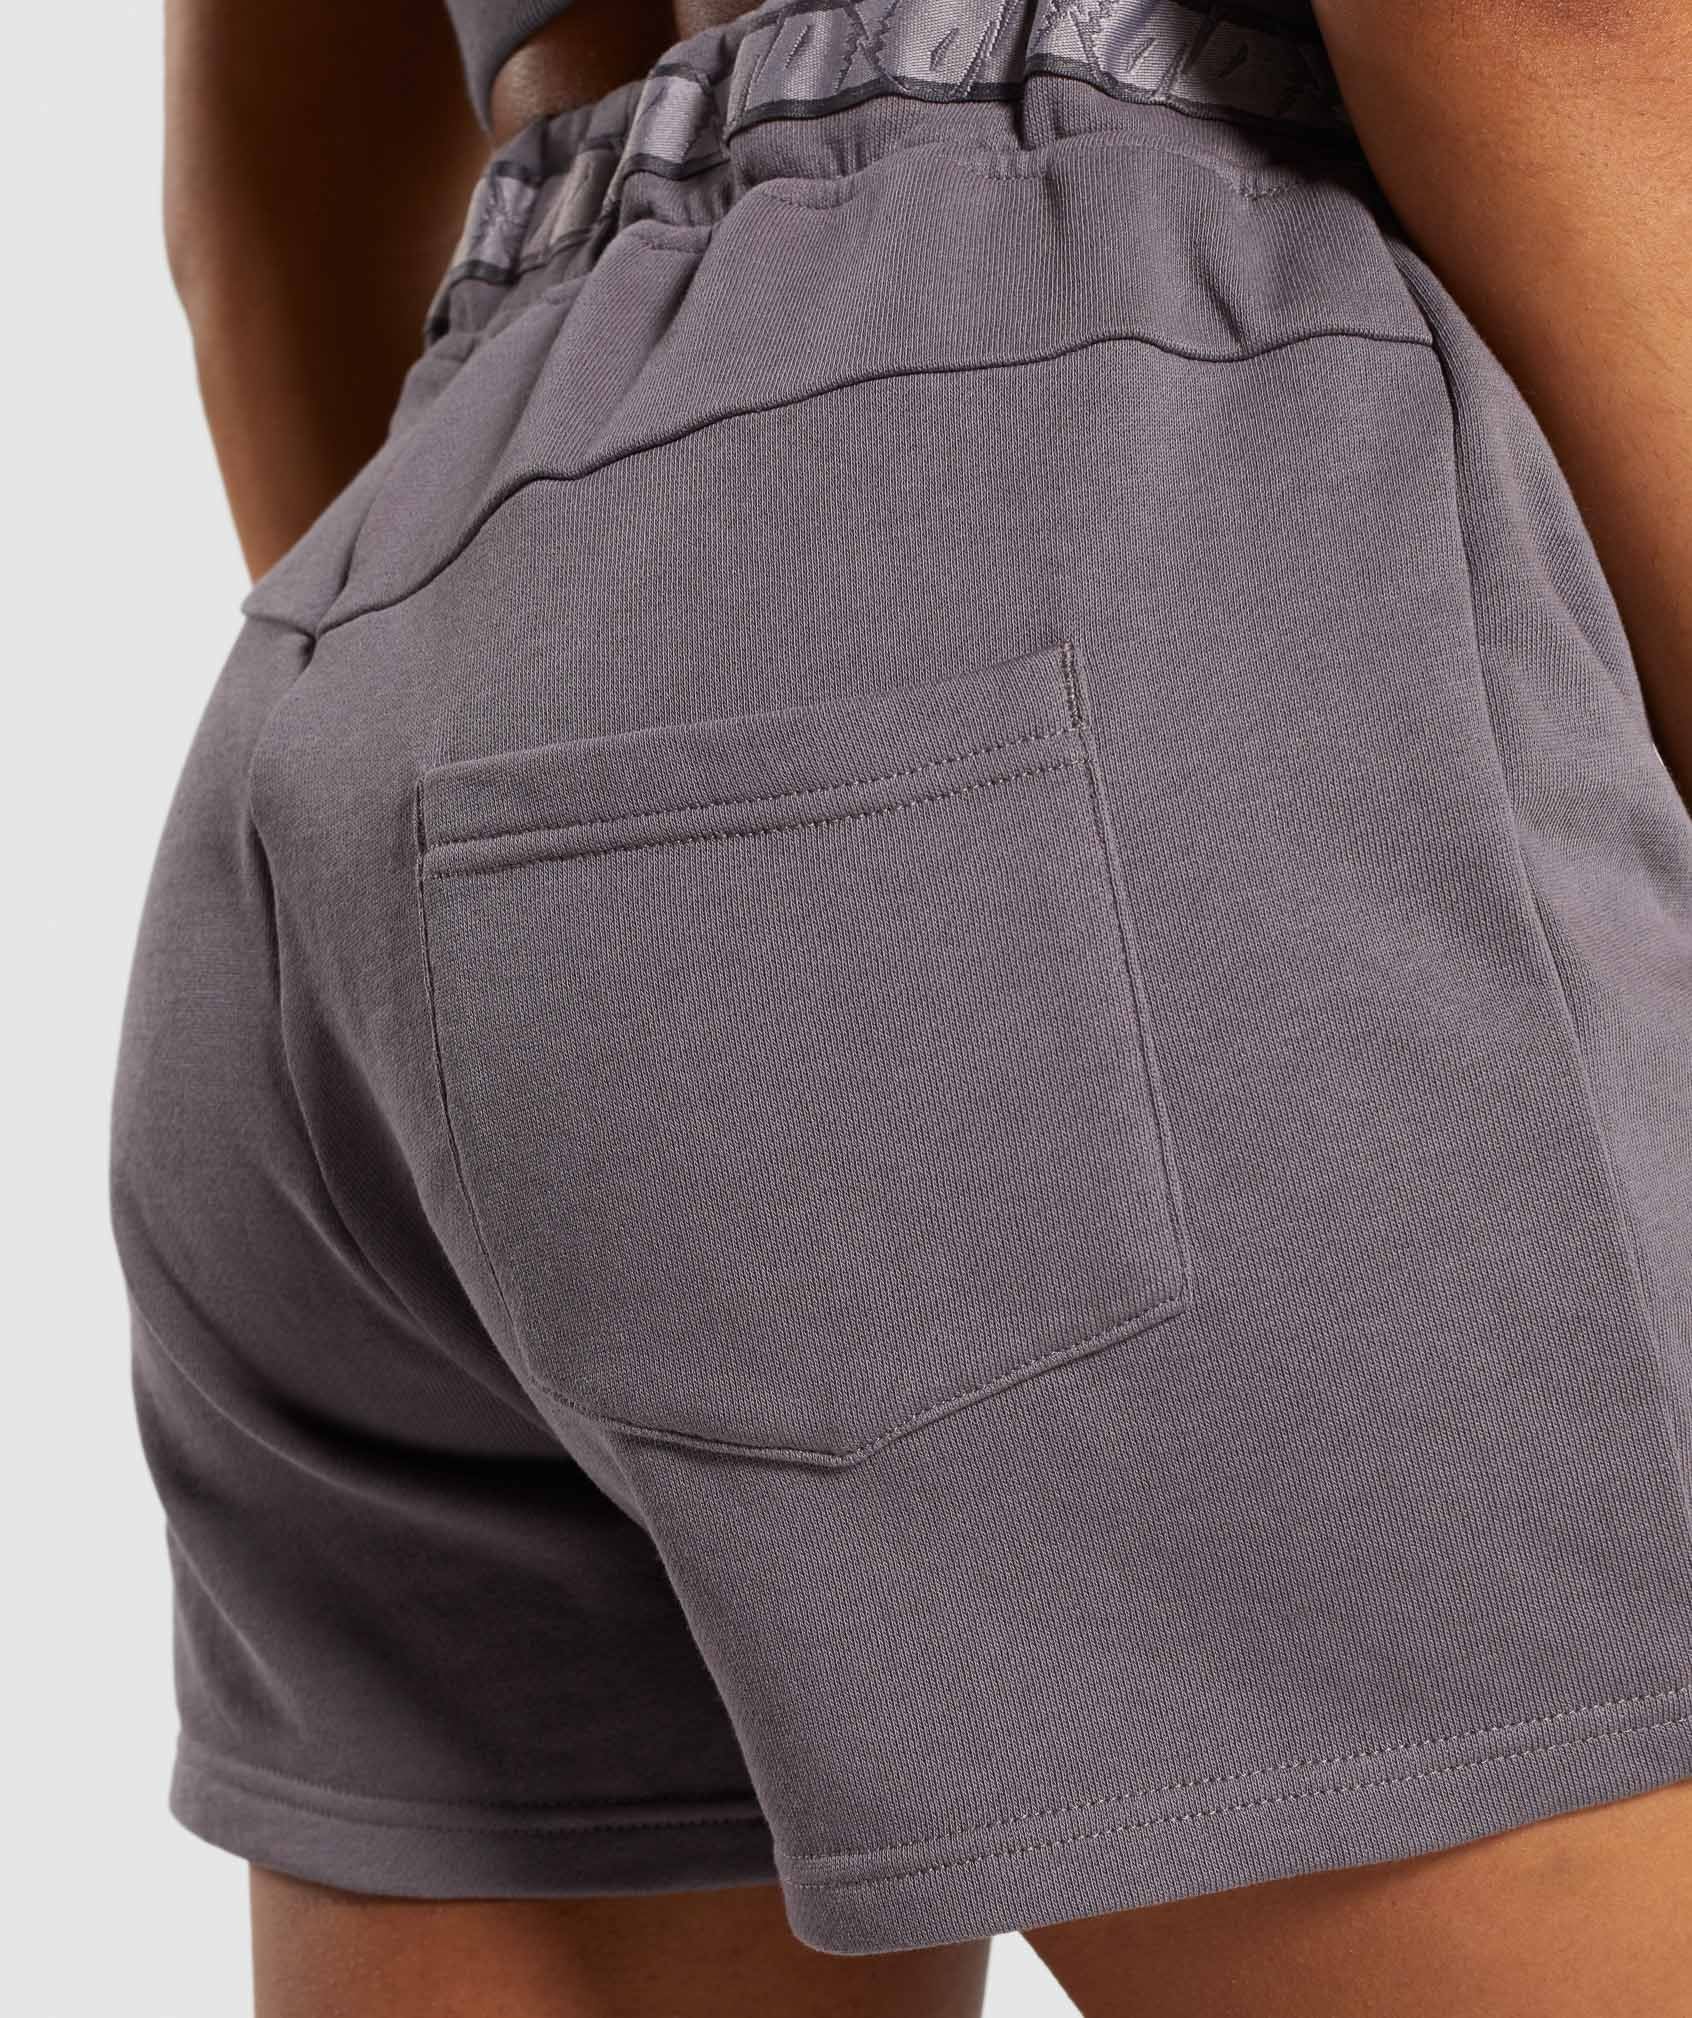 24/7 Shorts in Slate Lavender - view 5